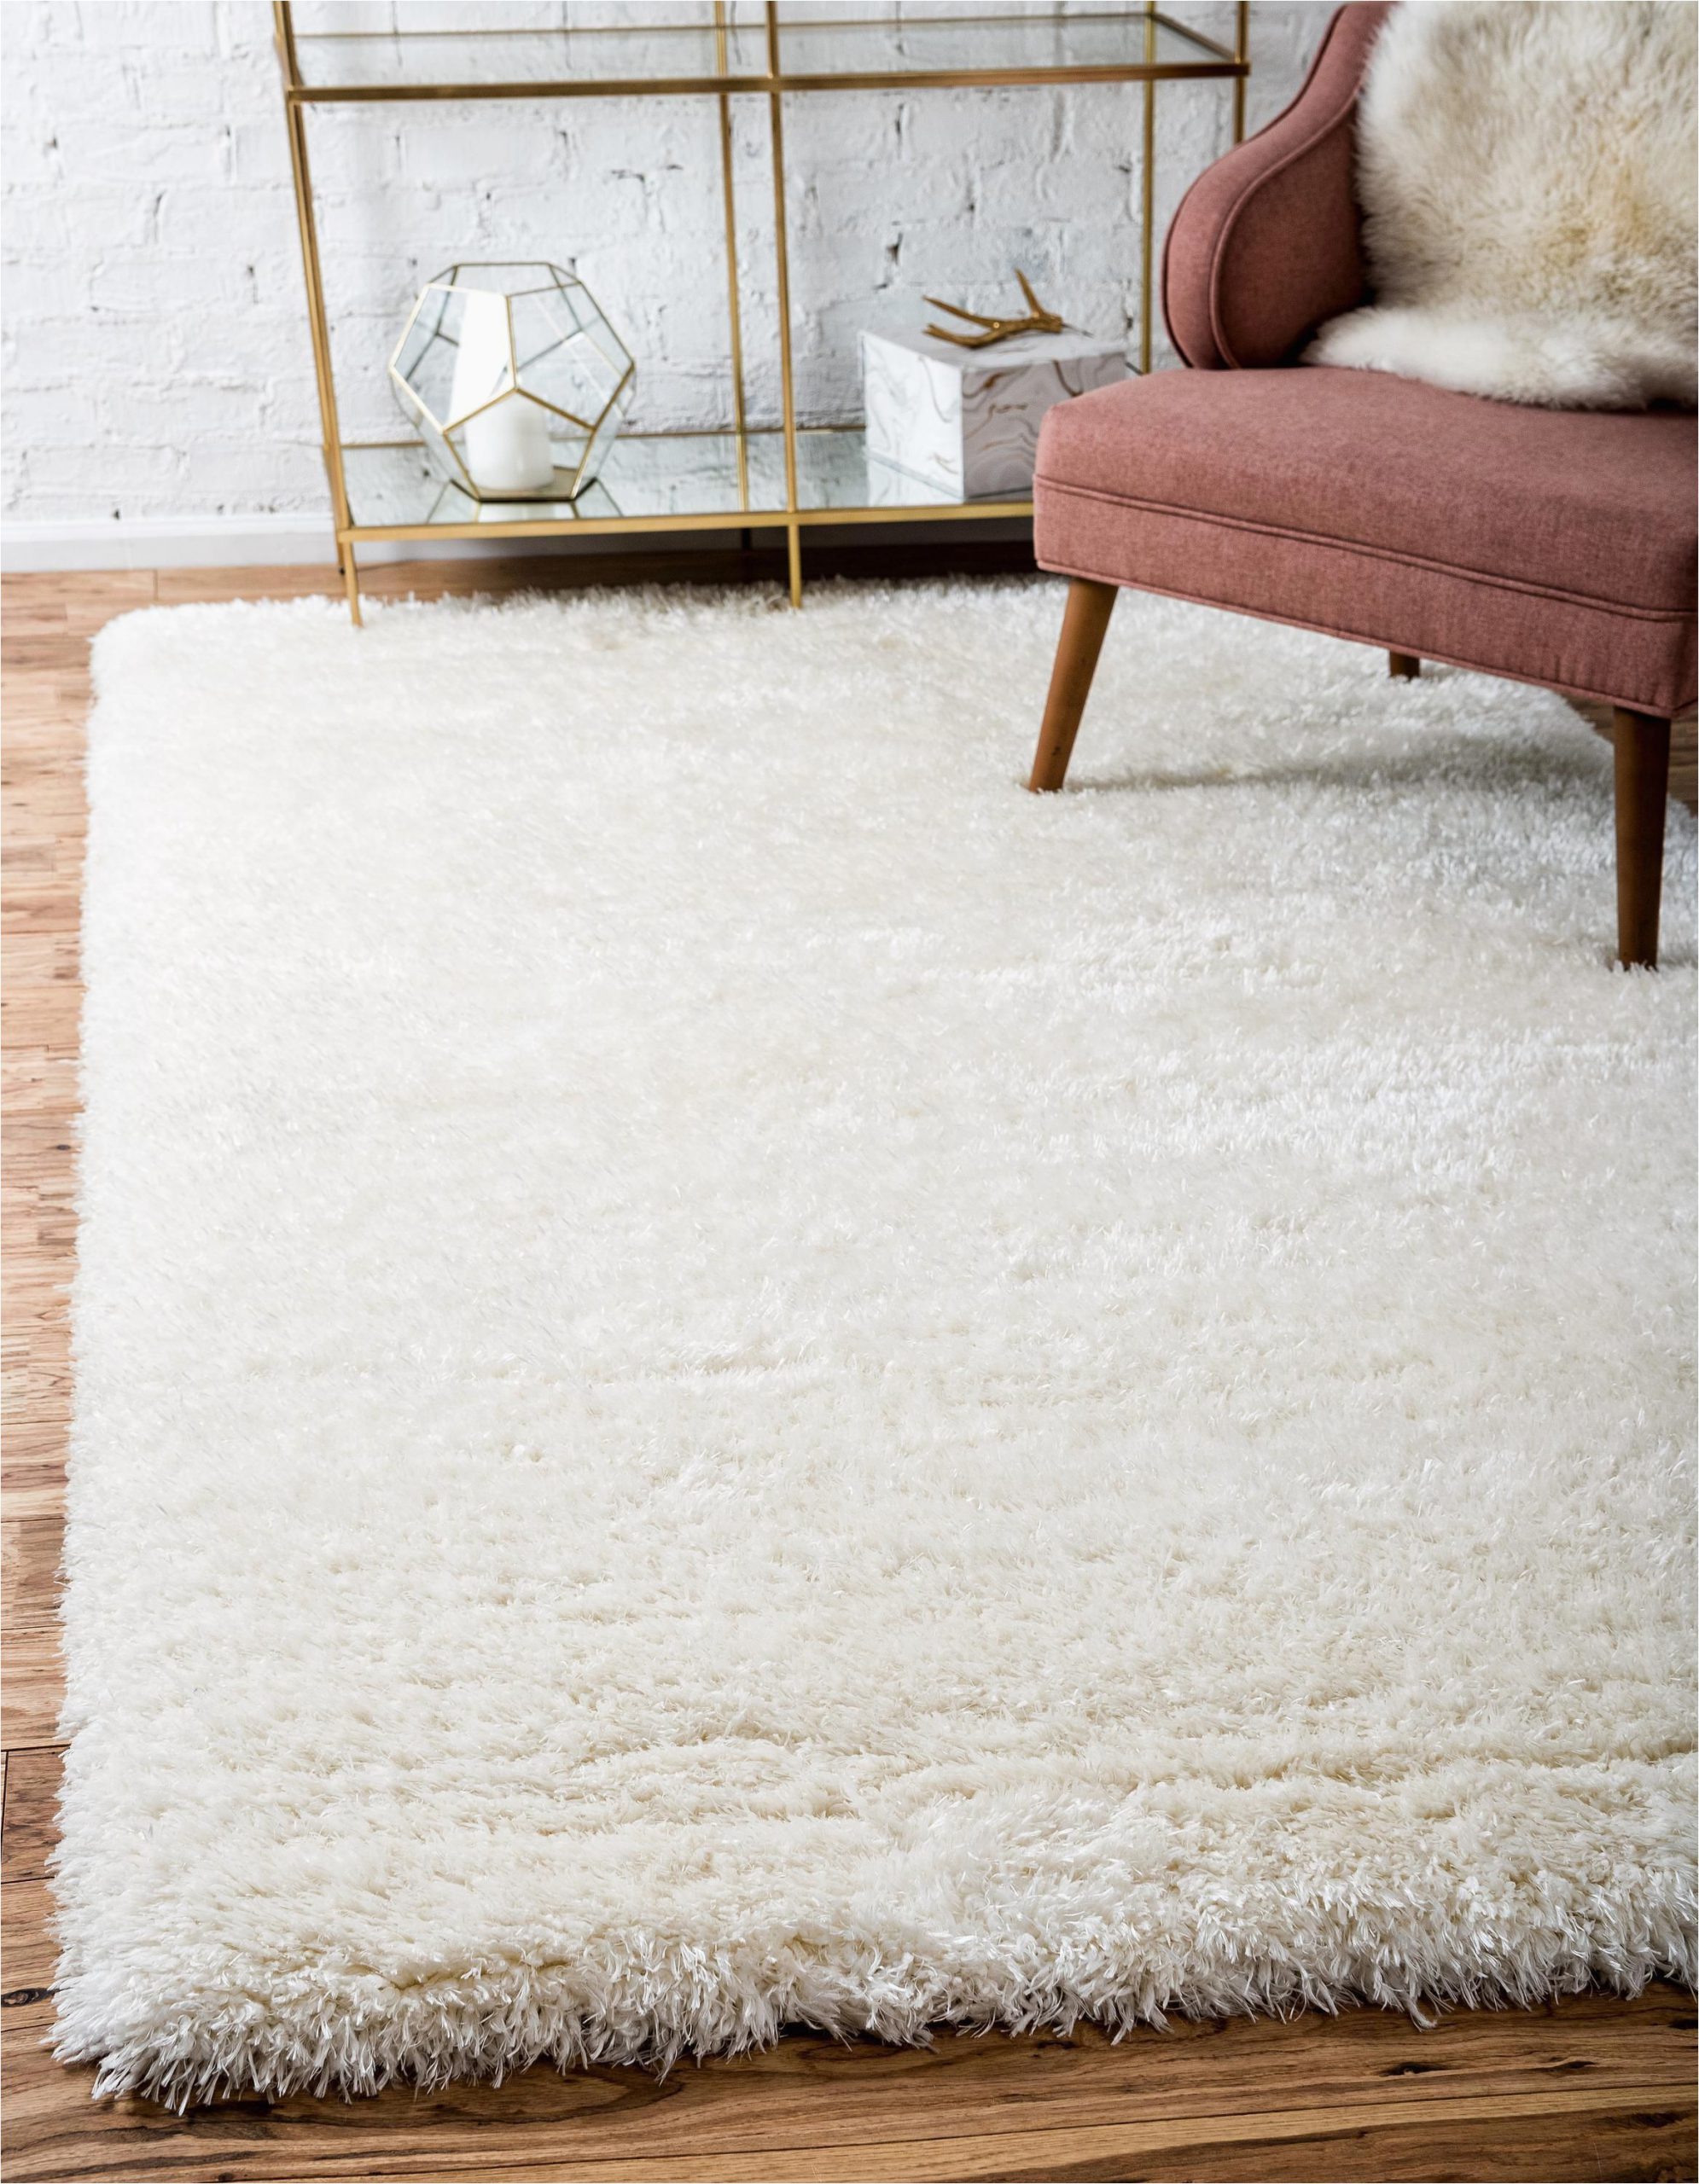 Gaines Hand Woven Natural area Rug by Charlton Home Haiden Luxury Shaggy area Rug In 2020